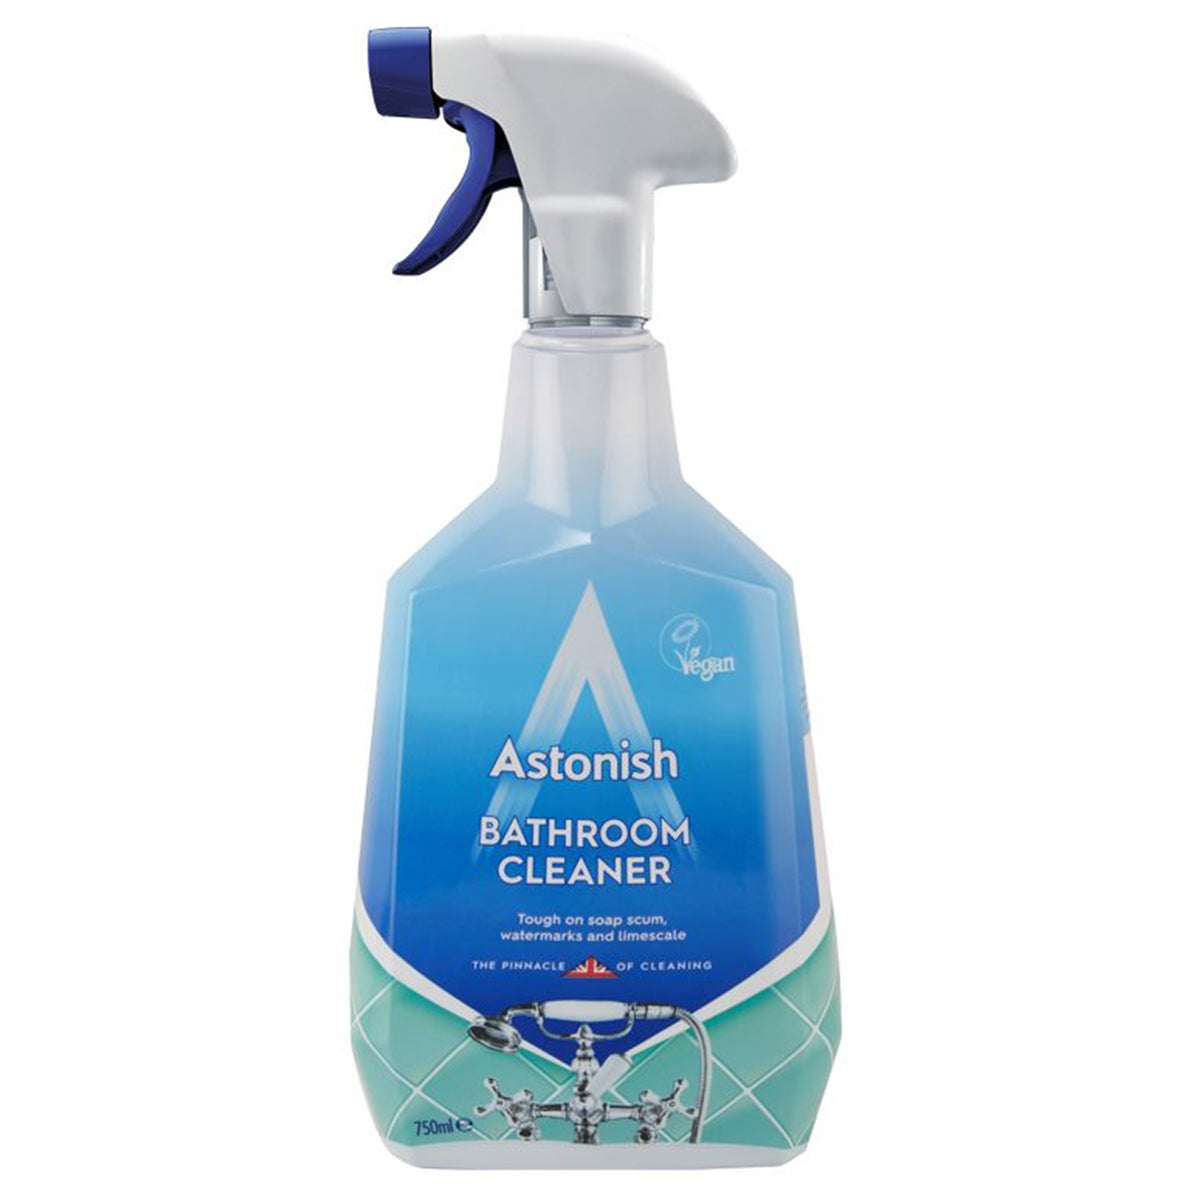 An Astonish Bathroom Cleaner - 750ml spray bottle with a blue and white label.